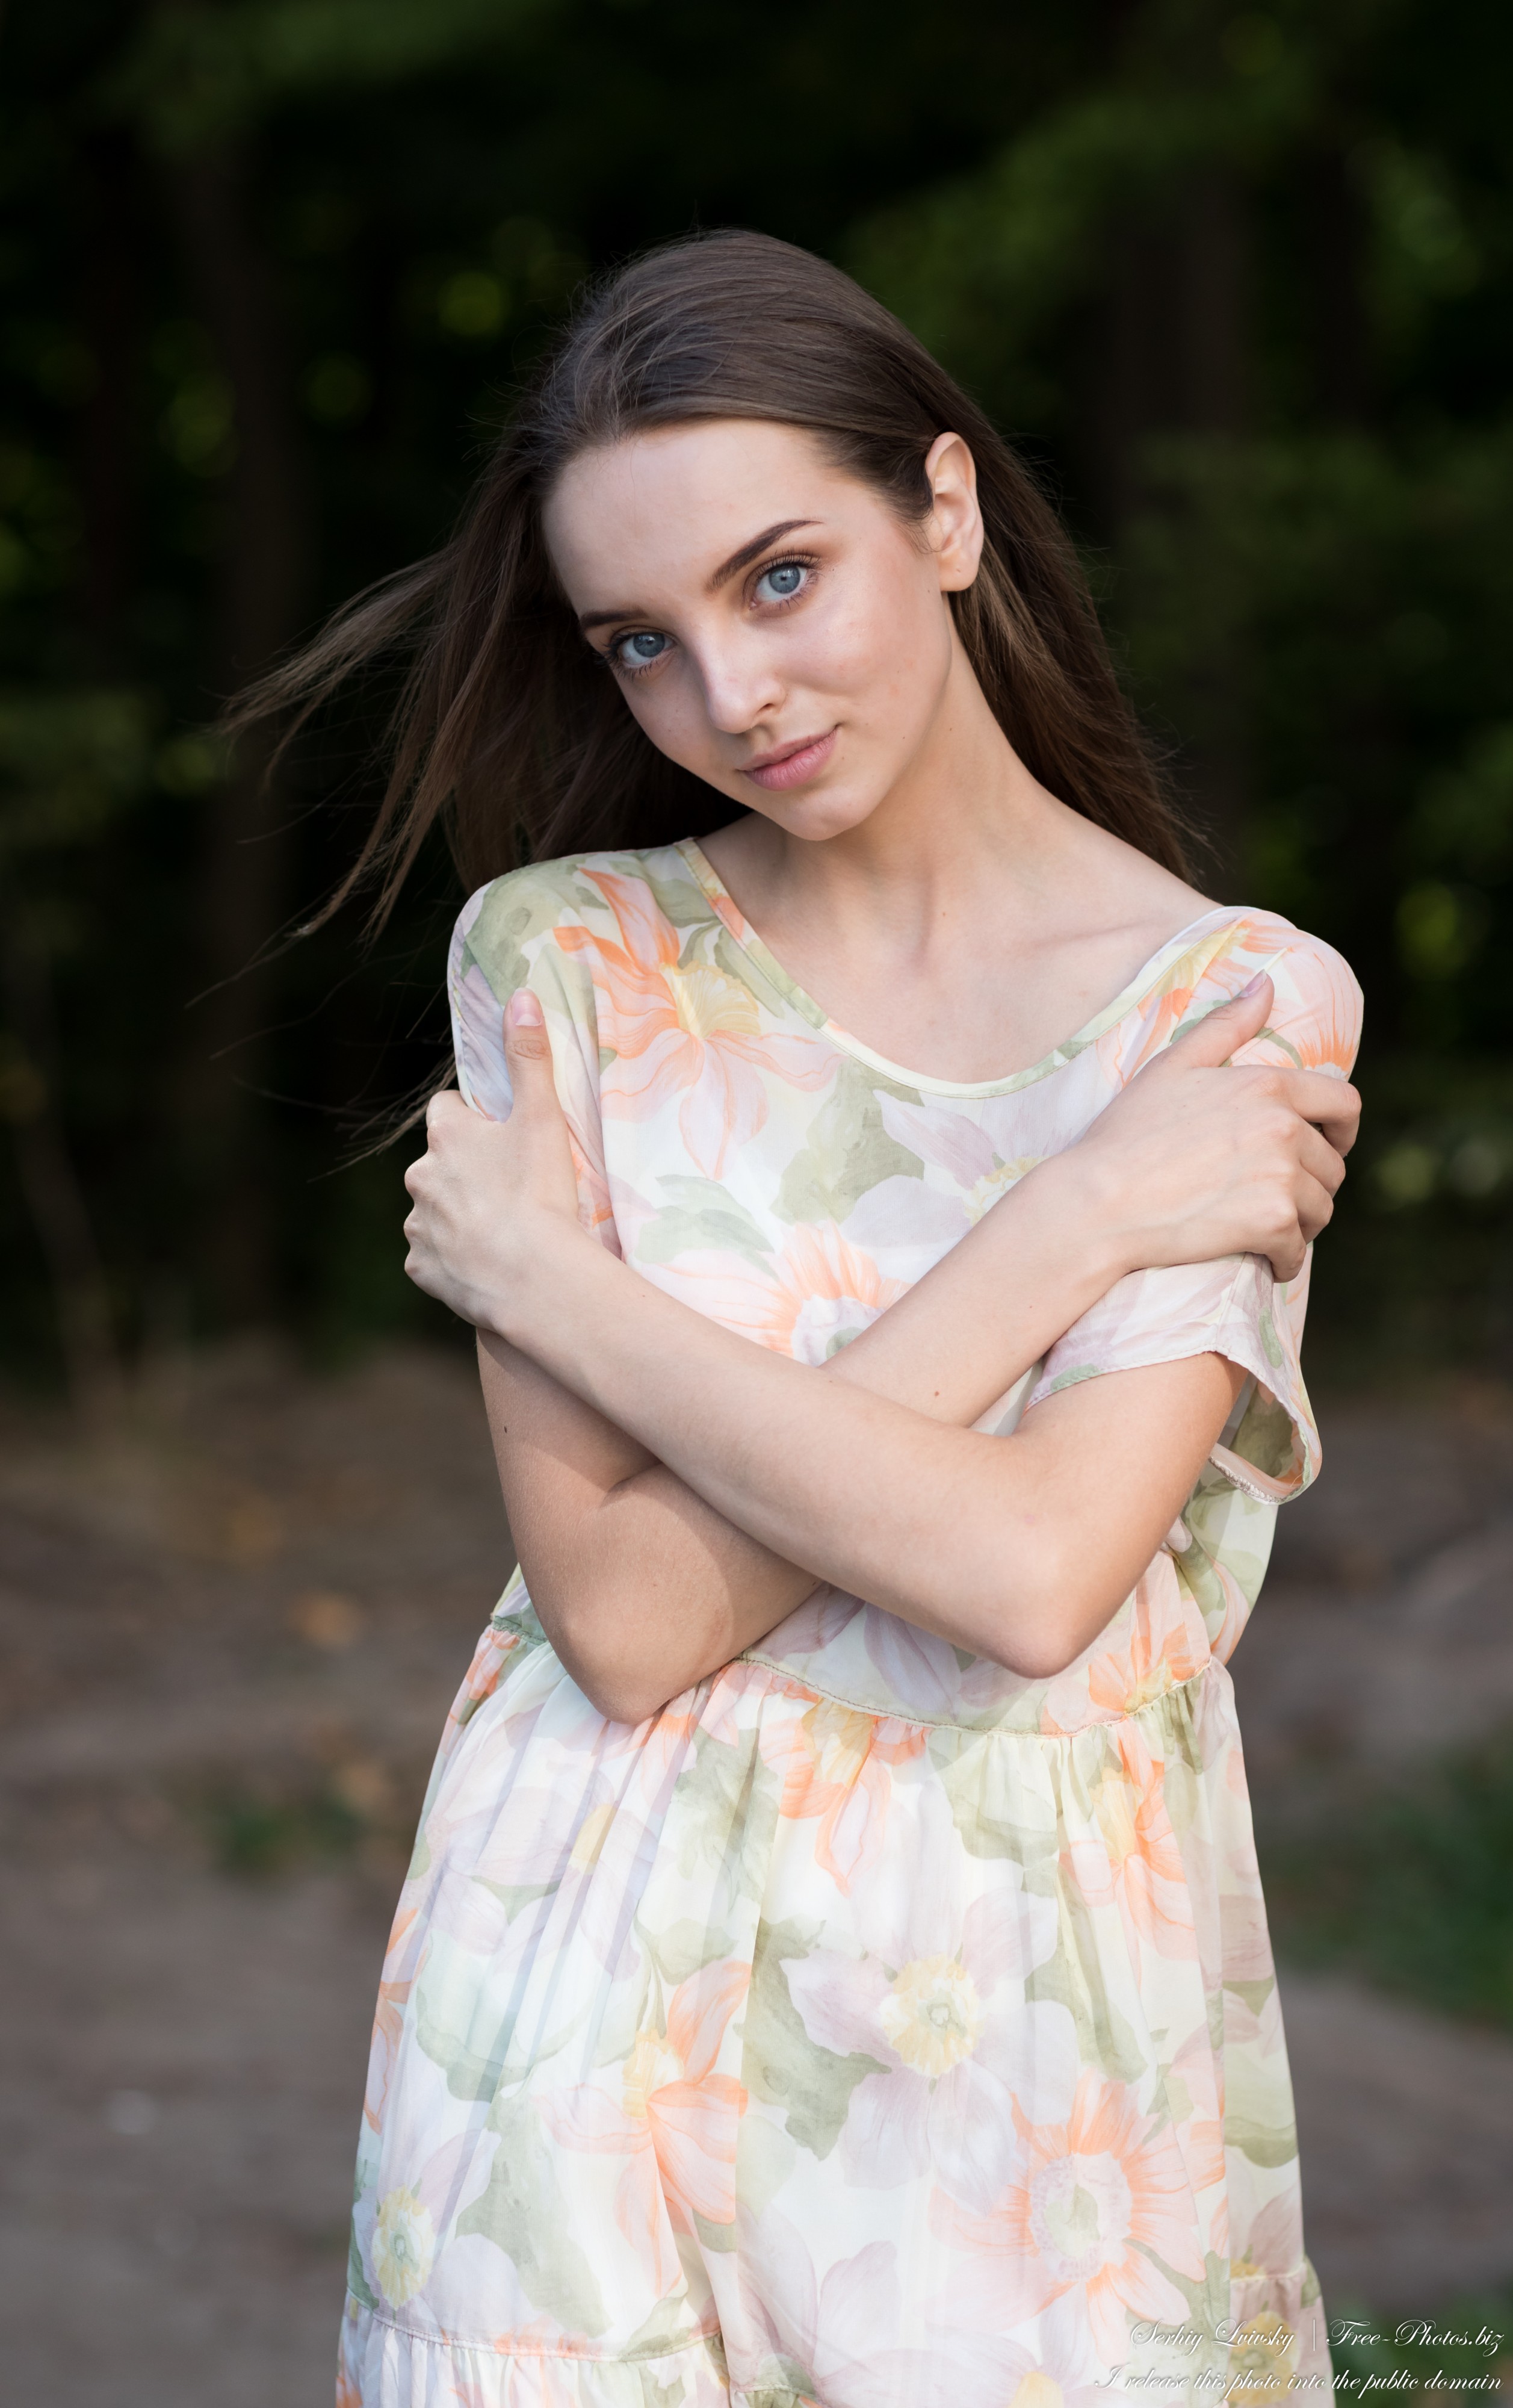 Photo Of Vika A 17 Year Old Brunette Girl Photographed By Serhiy Lvivsky In September 2020